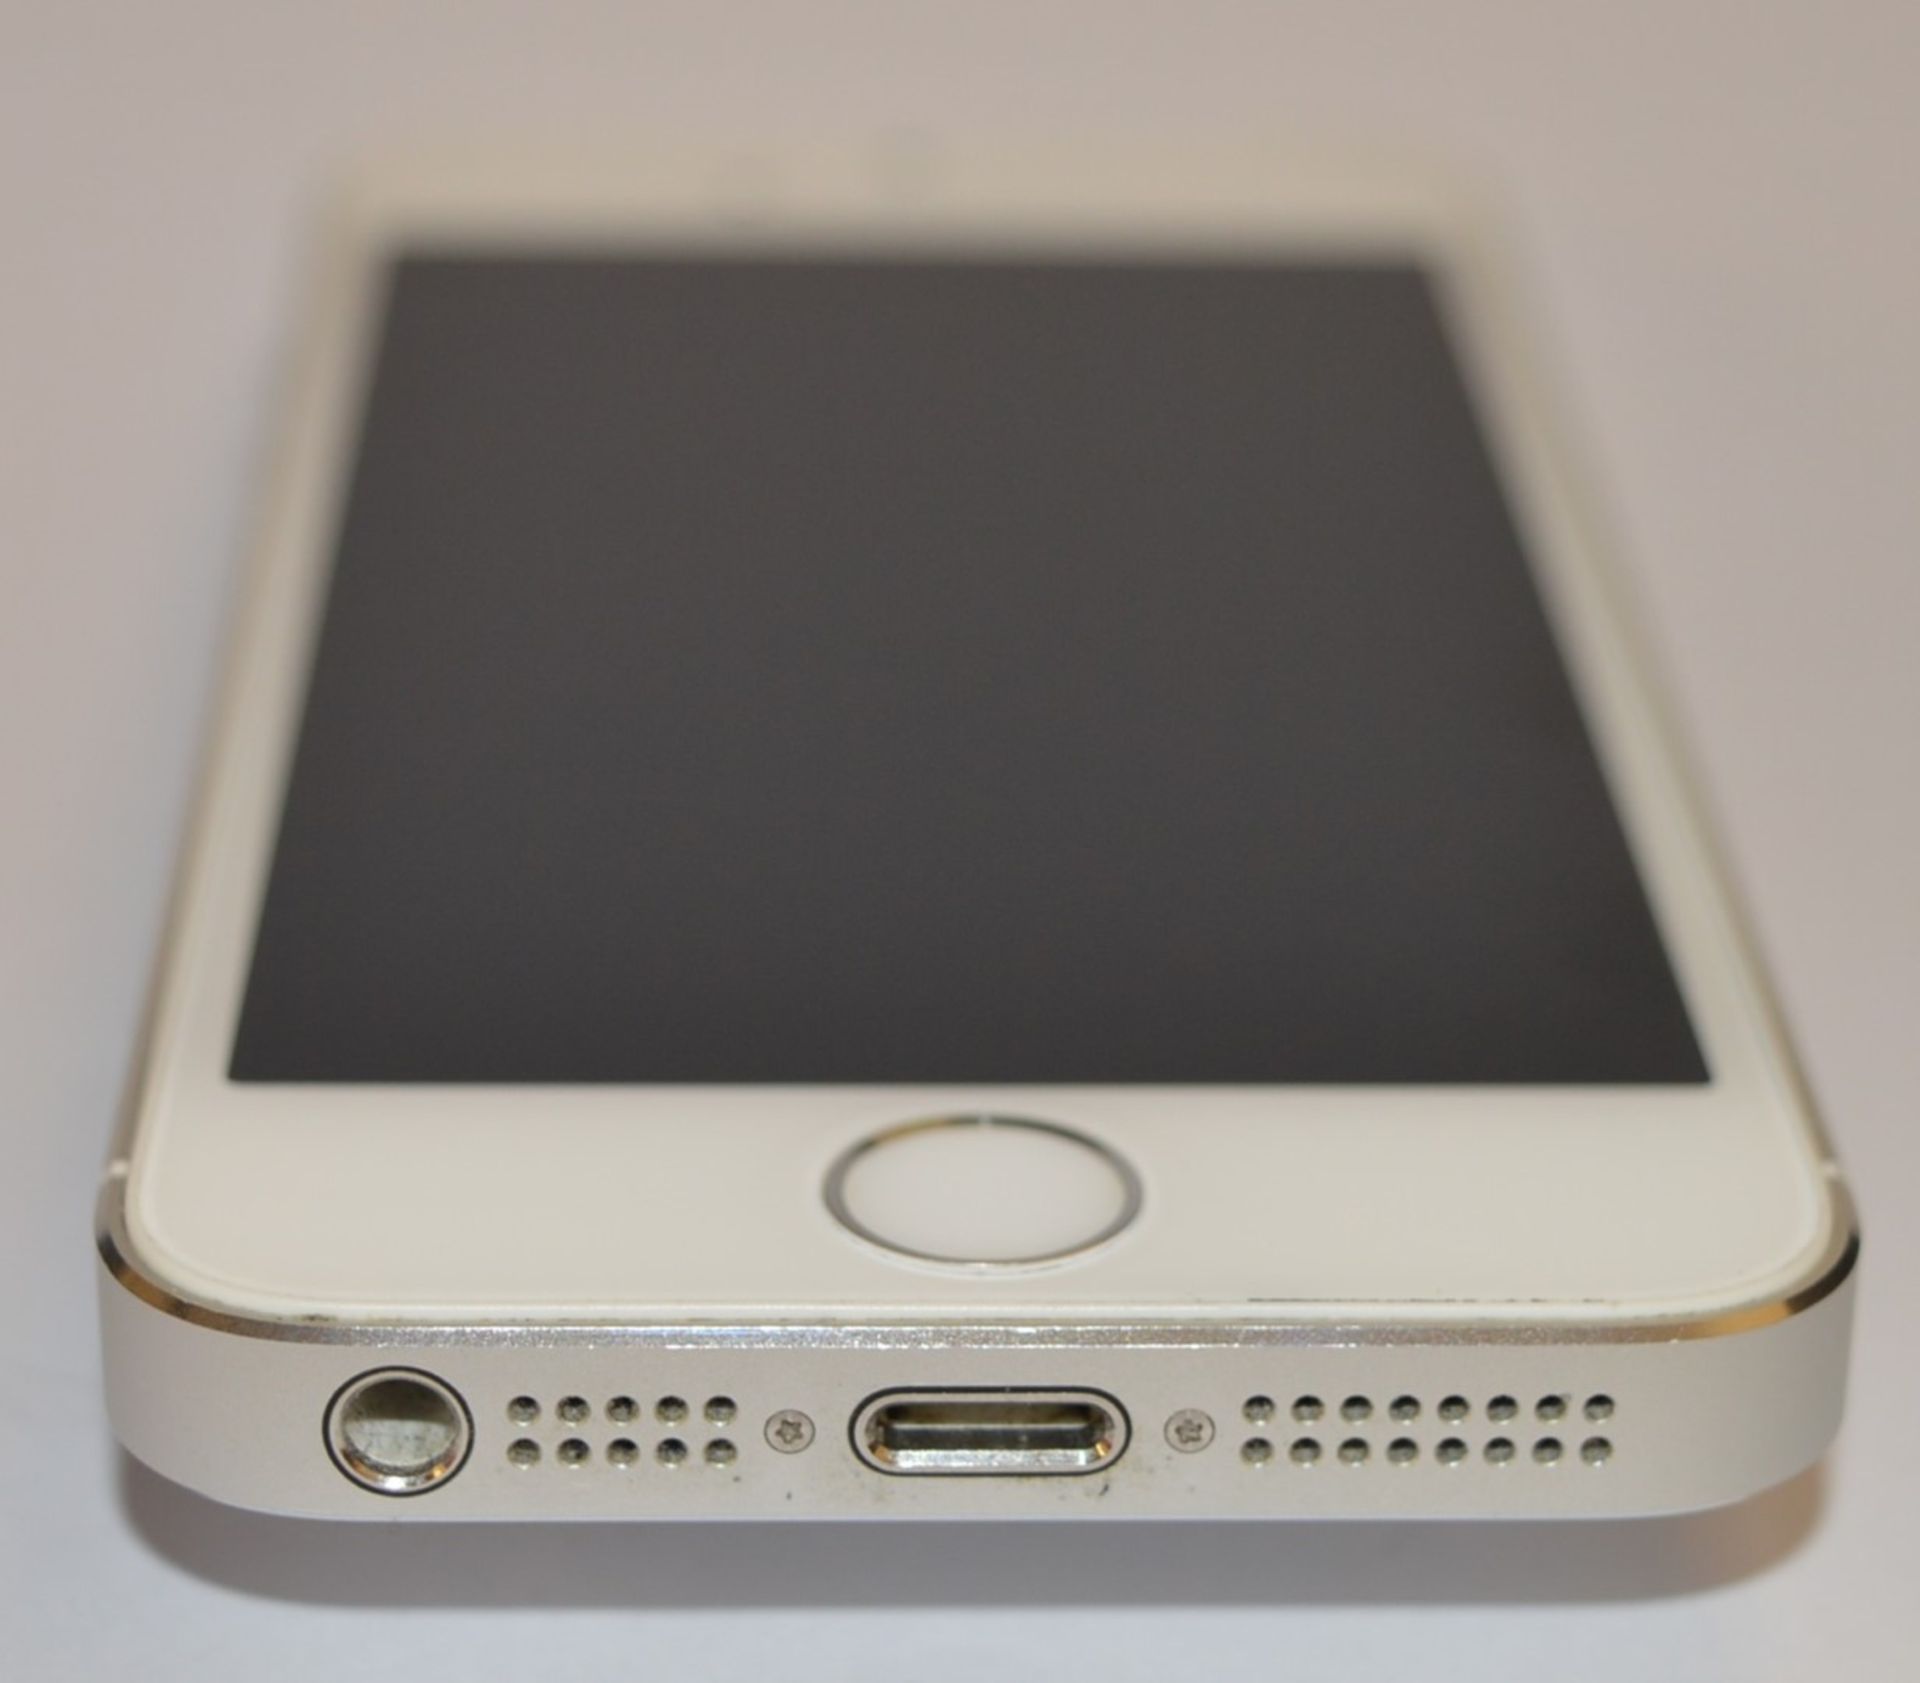 1 x Apple Iphone 5S White 32gb Mobile Phone - Model A1457 - Excellent Cosmetic Condition - Good - Image 5 of 15